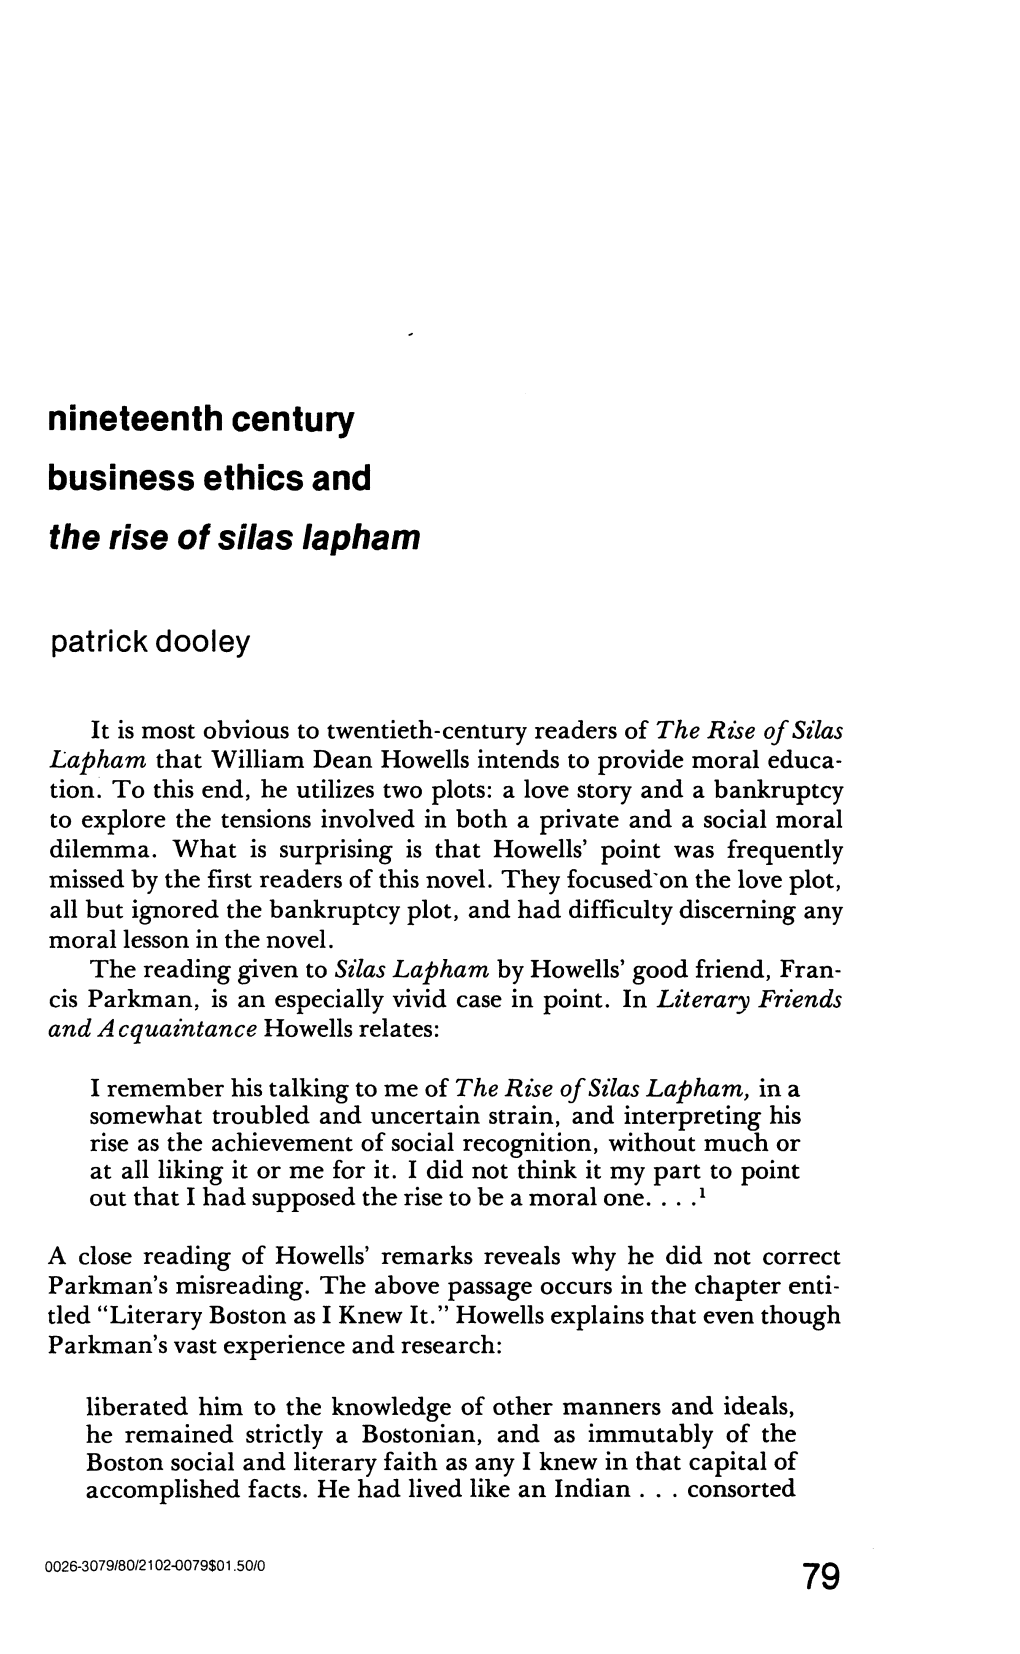 Nineteenth Century Business Ethics and the Rise of Silas Lapham 79